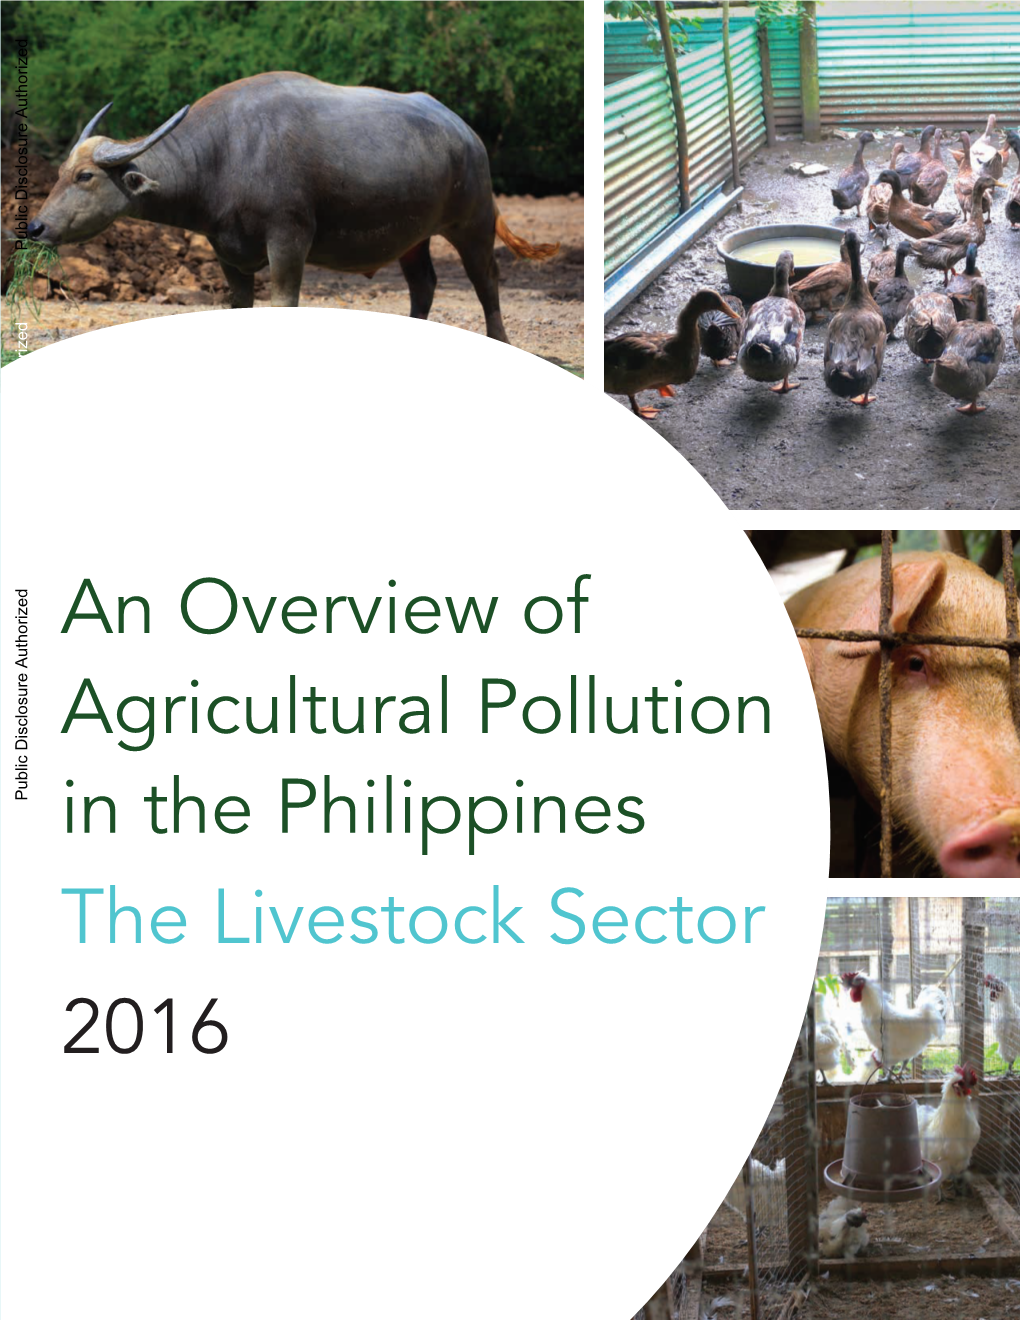 An Overview of Agricultural Pollution in the Philippines the Livestock Sector 2016